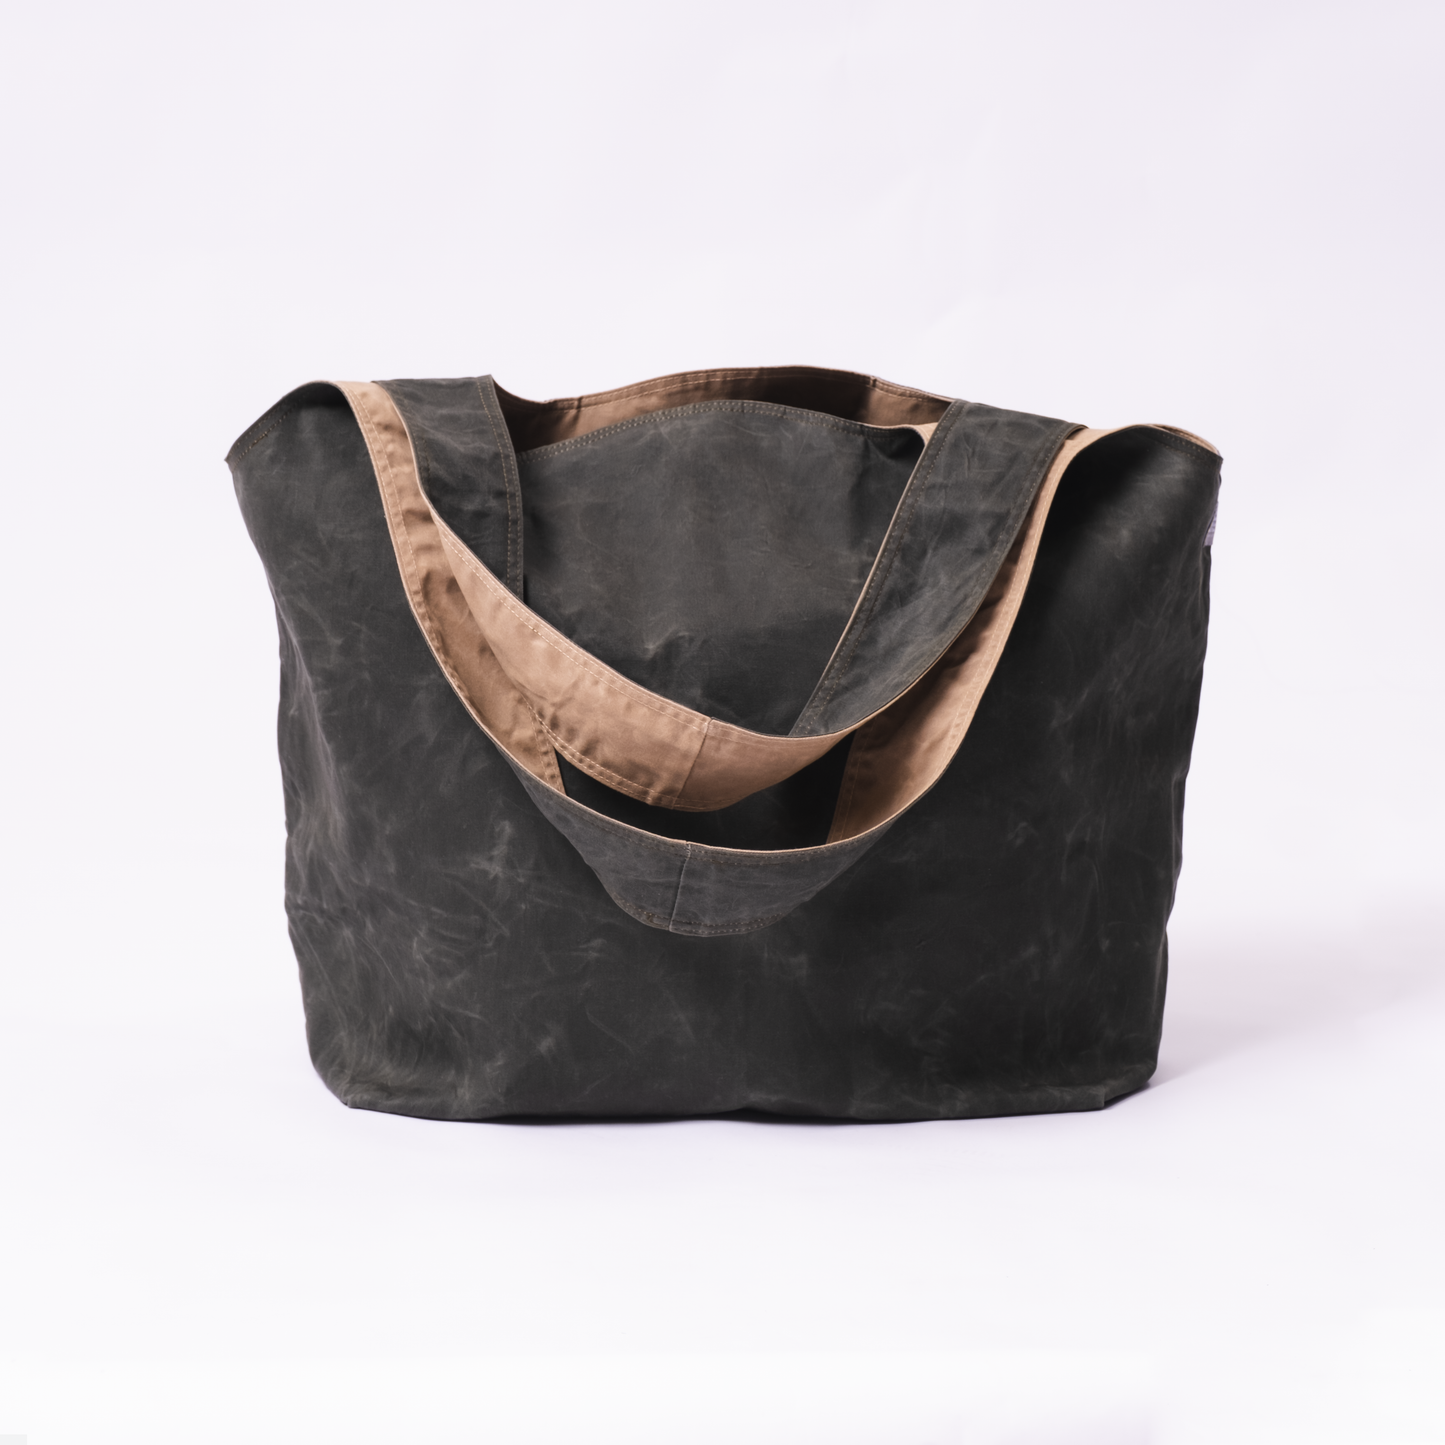 REVERSIBLE MARKET TOTE (Large) - SAND & MOSS